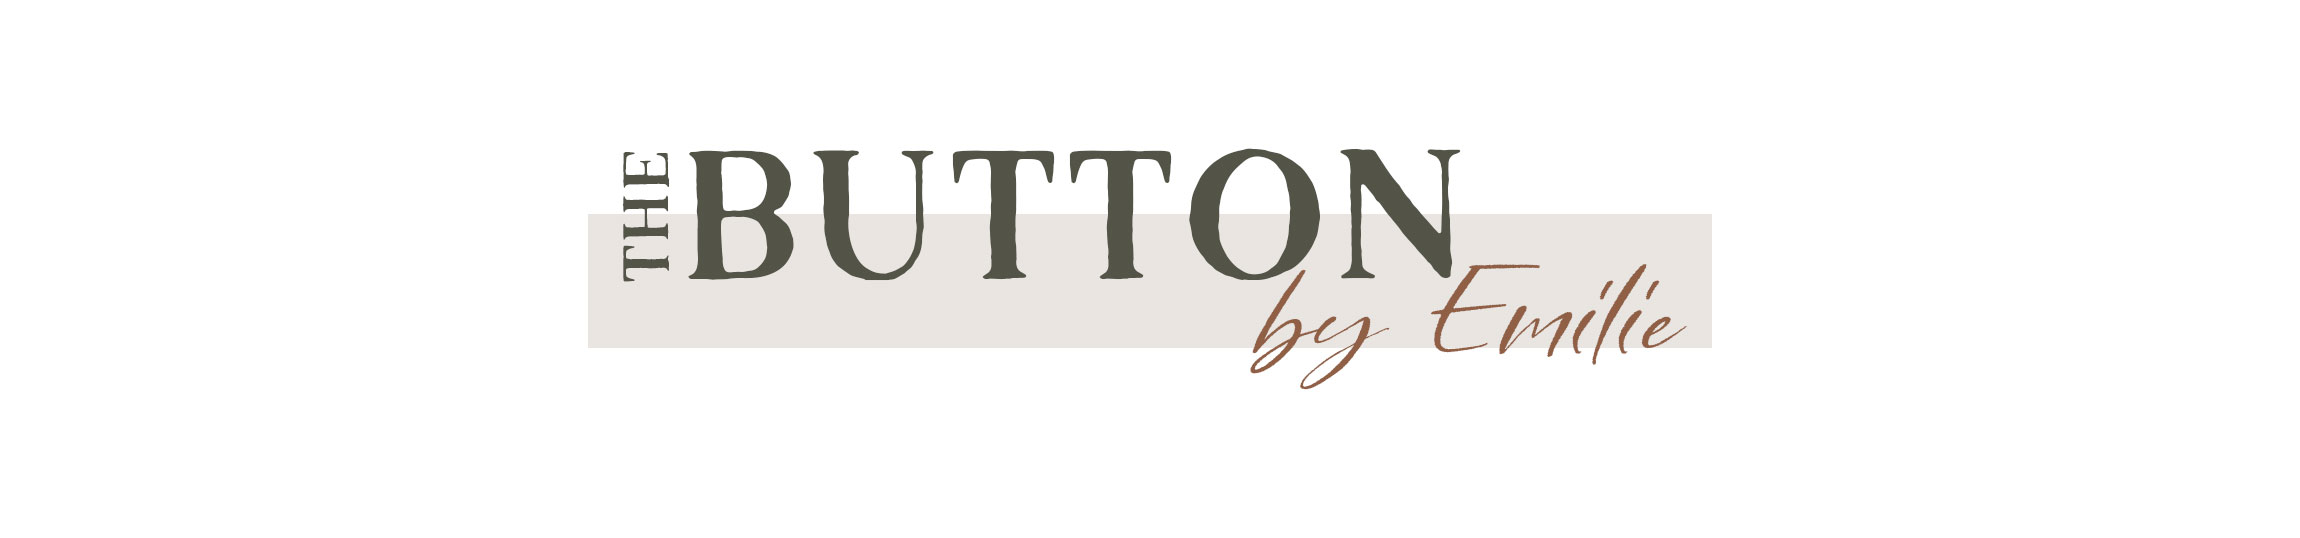 THE BUTTON by Emilie